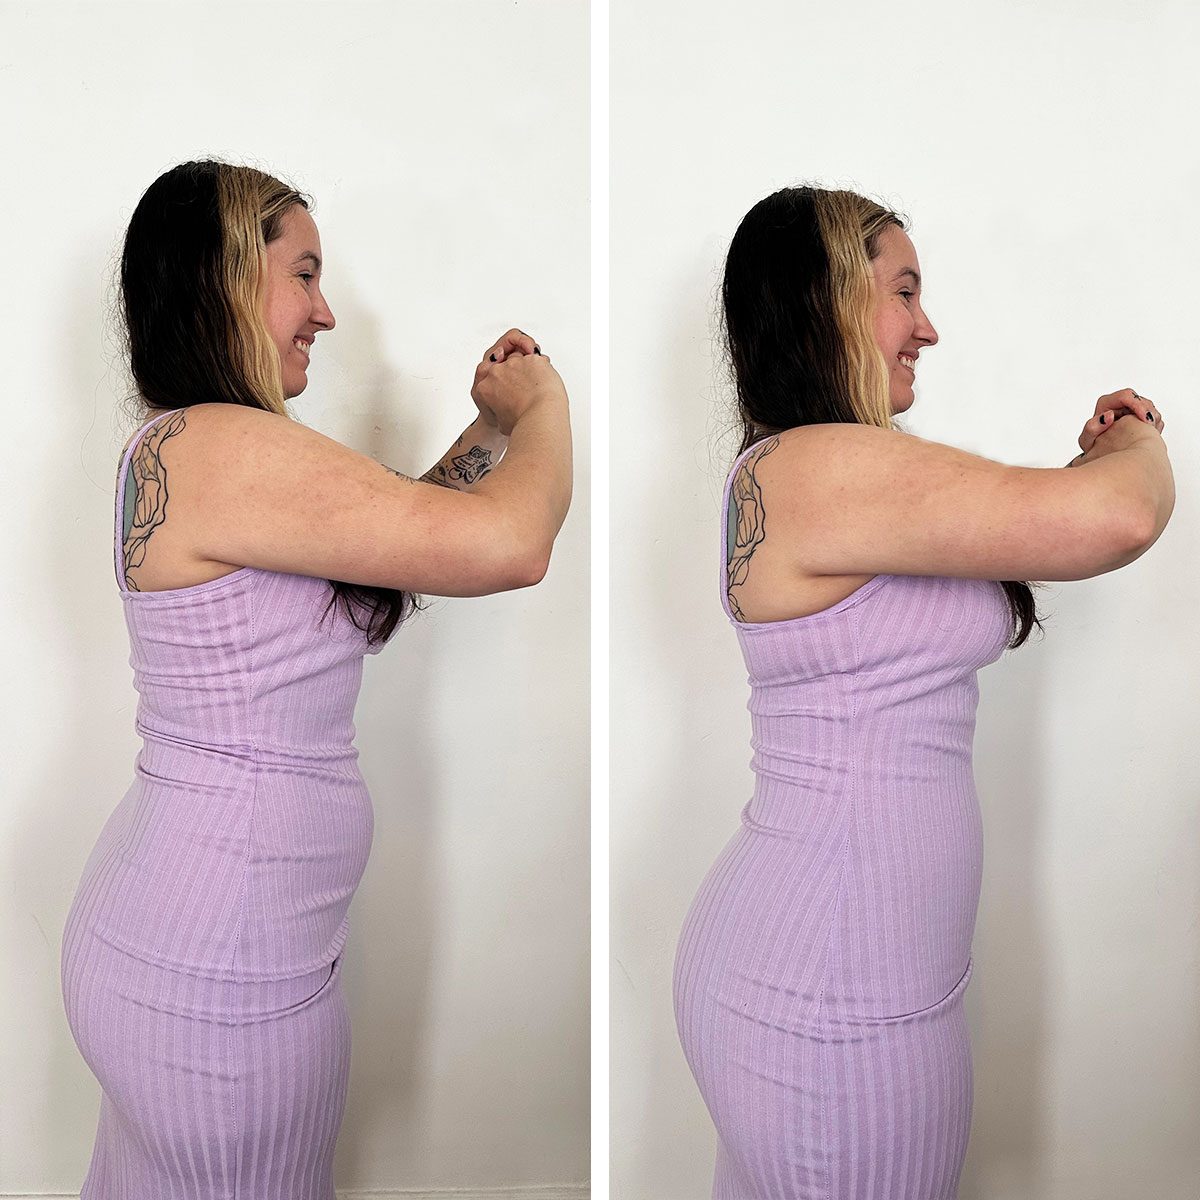 Honeylove Shapewear Before And After - Shop on Pinterest